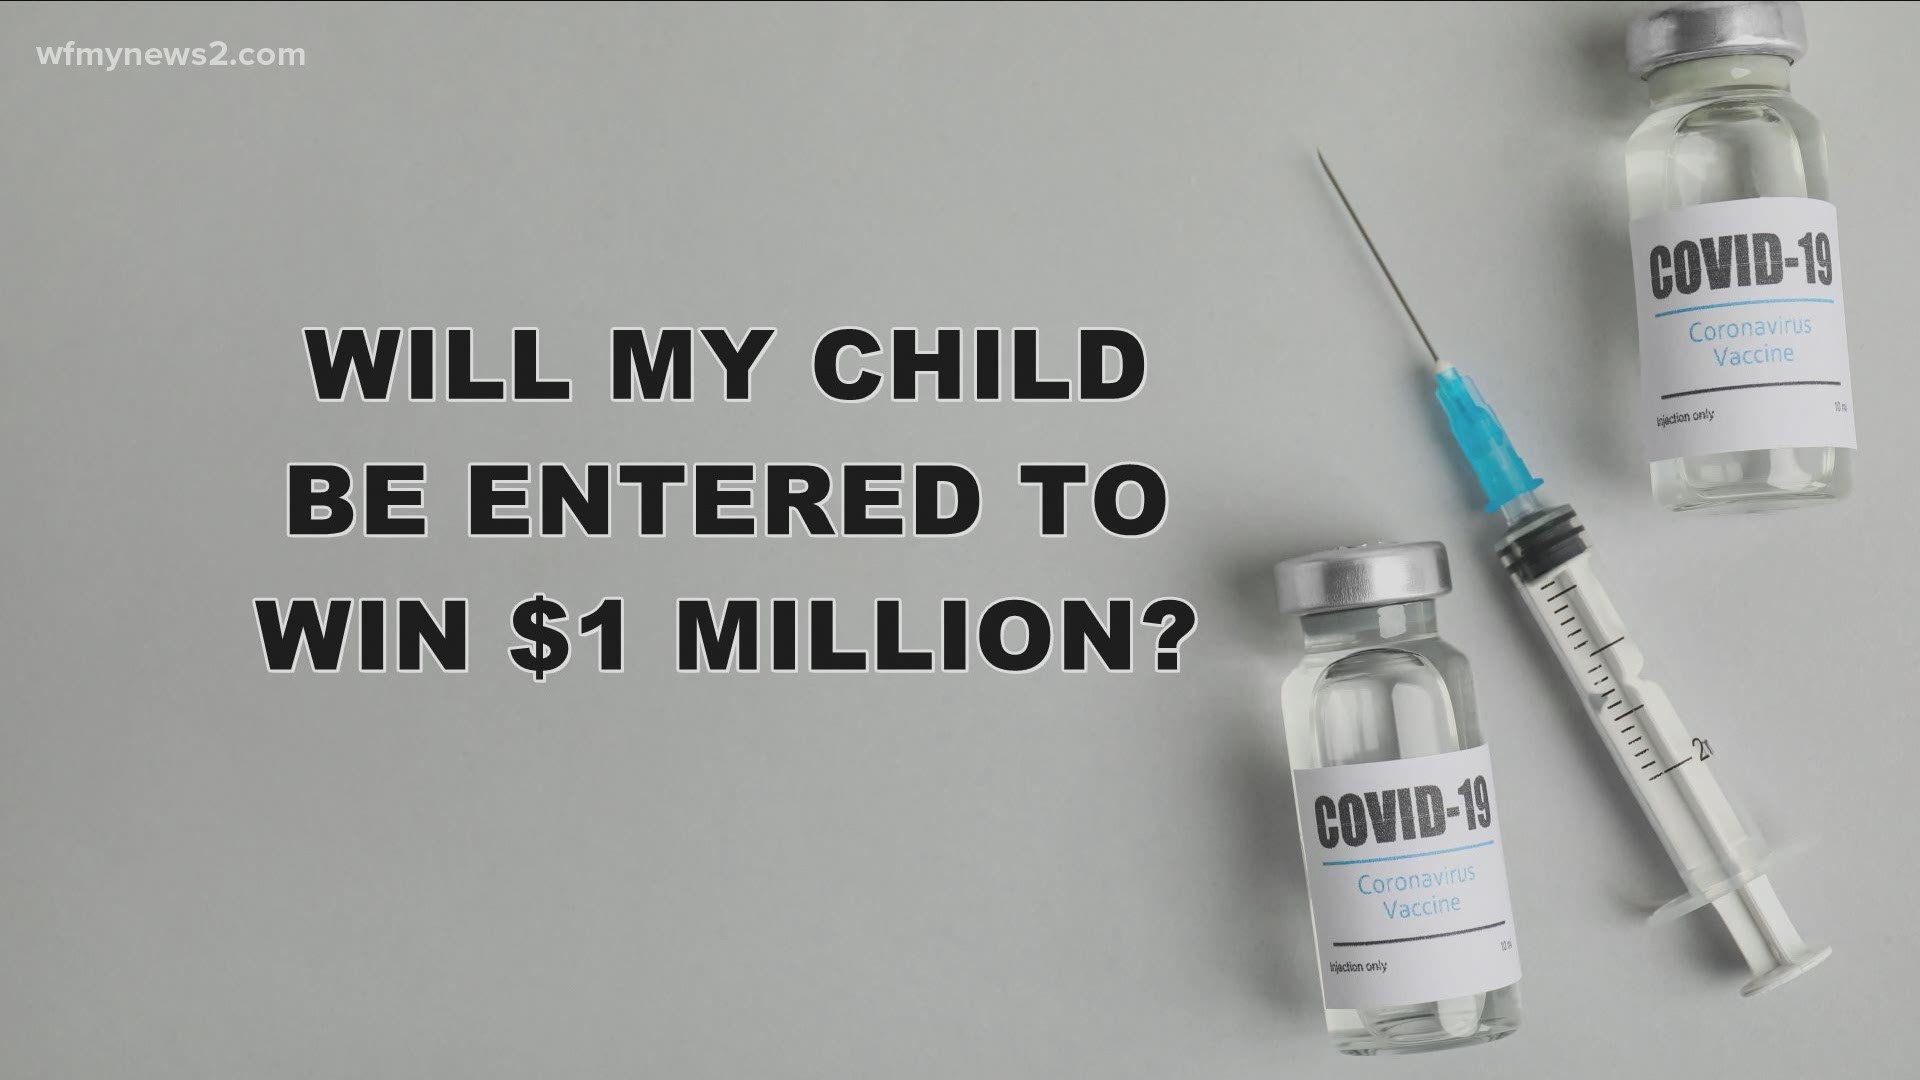 We answer the top questions about North Carolina’s new $1 million lottery prize for getting the COVID-19 vaccine.